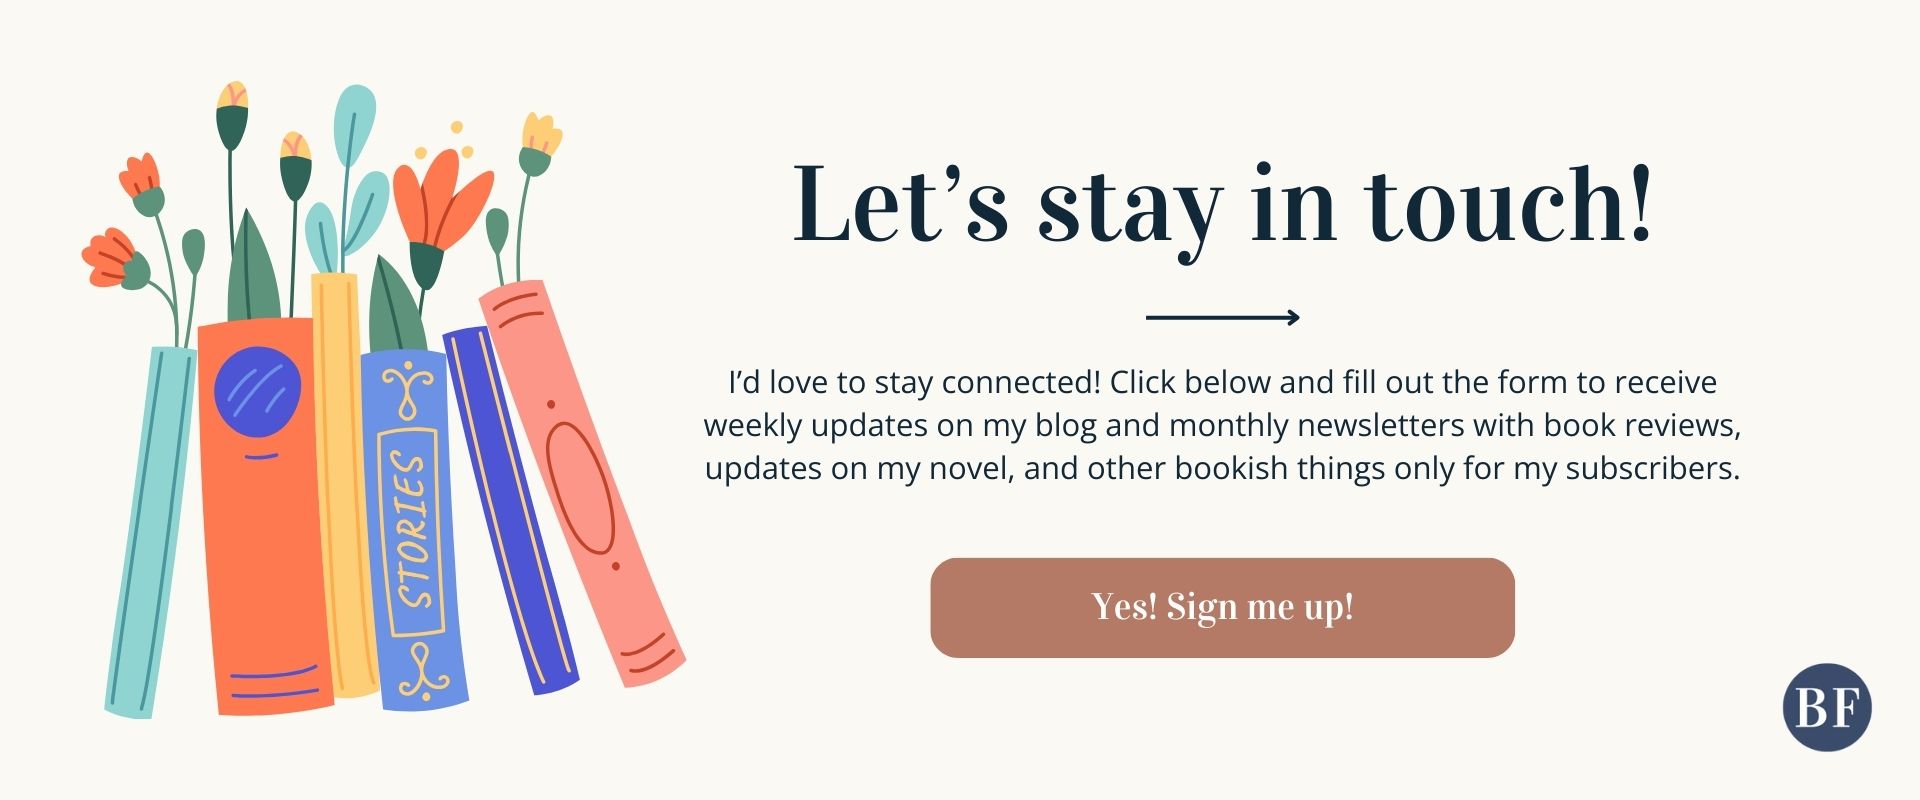 Graphic with the title "Let's Stay In Touch! I’d love to stay connected! Click below and fill out the form to receive weekly updates on my blog and monthly newsletters with book reviews, updates on my novel, and other bookish things only for my subscribers" and a button saying "Yes! Sign me up!" next to a vibrant graphic drawing of books. Click this image to sign up for Beth Foreman's email list!